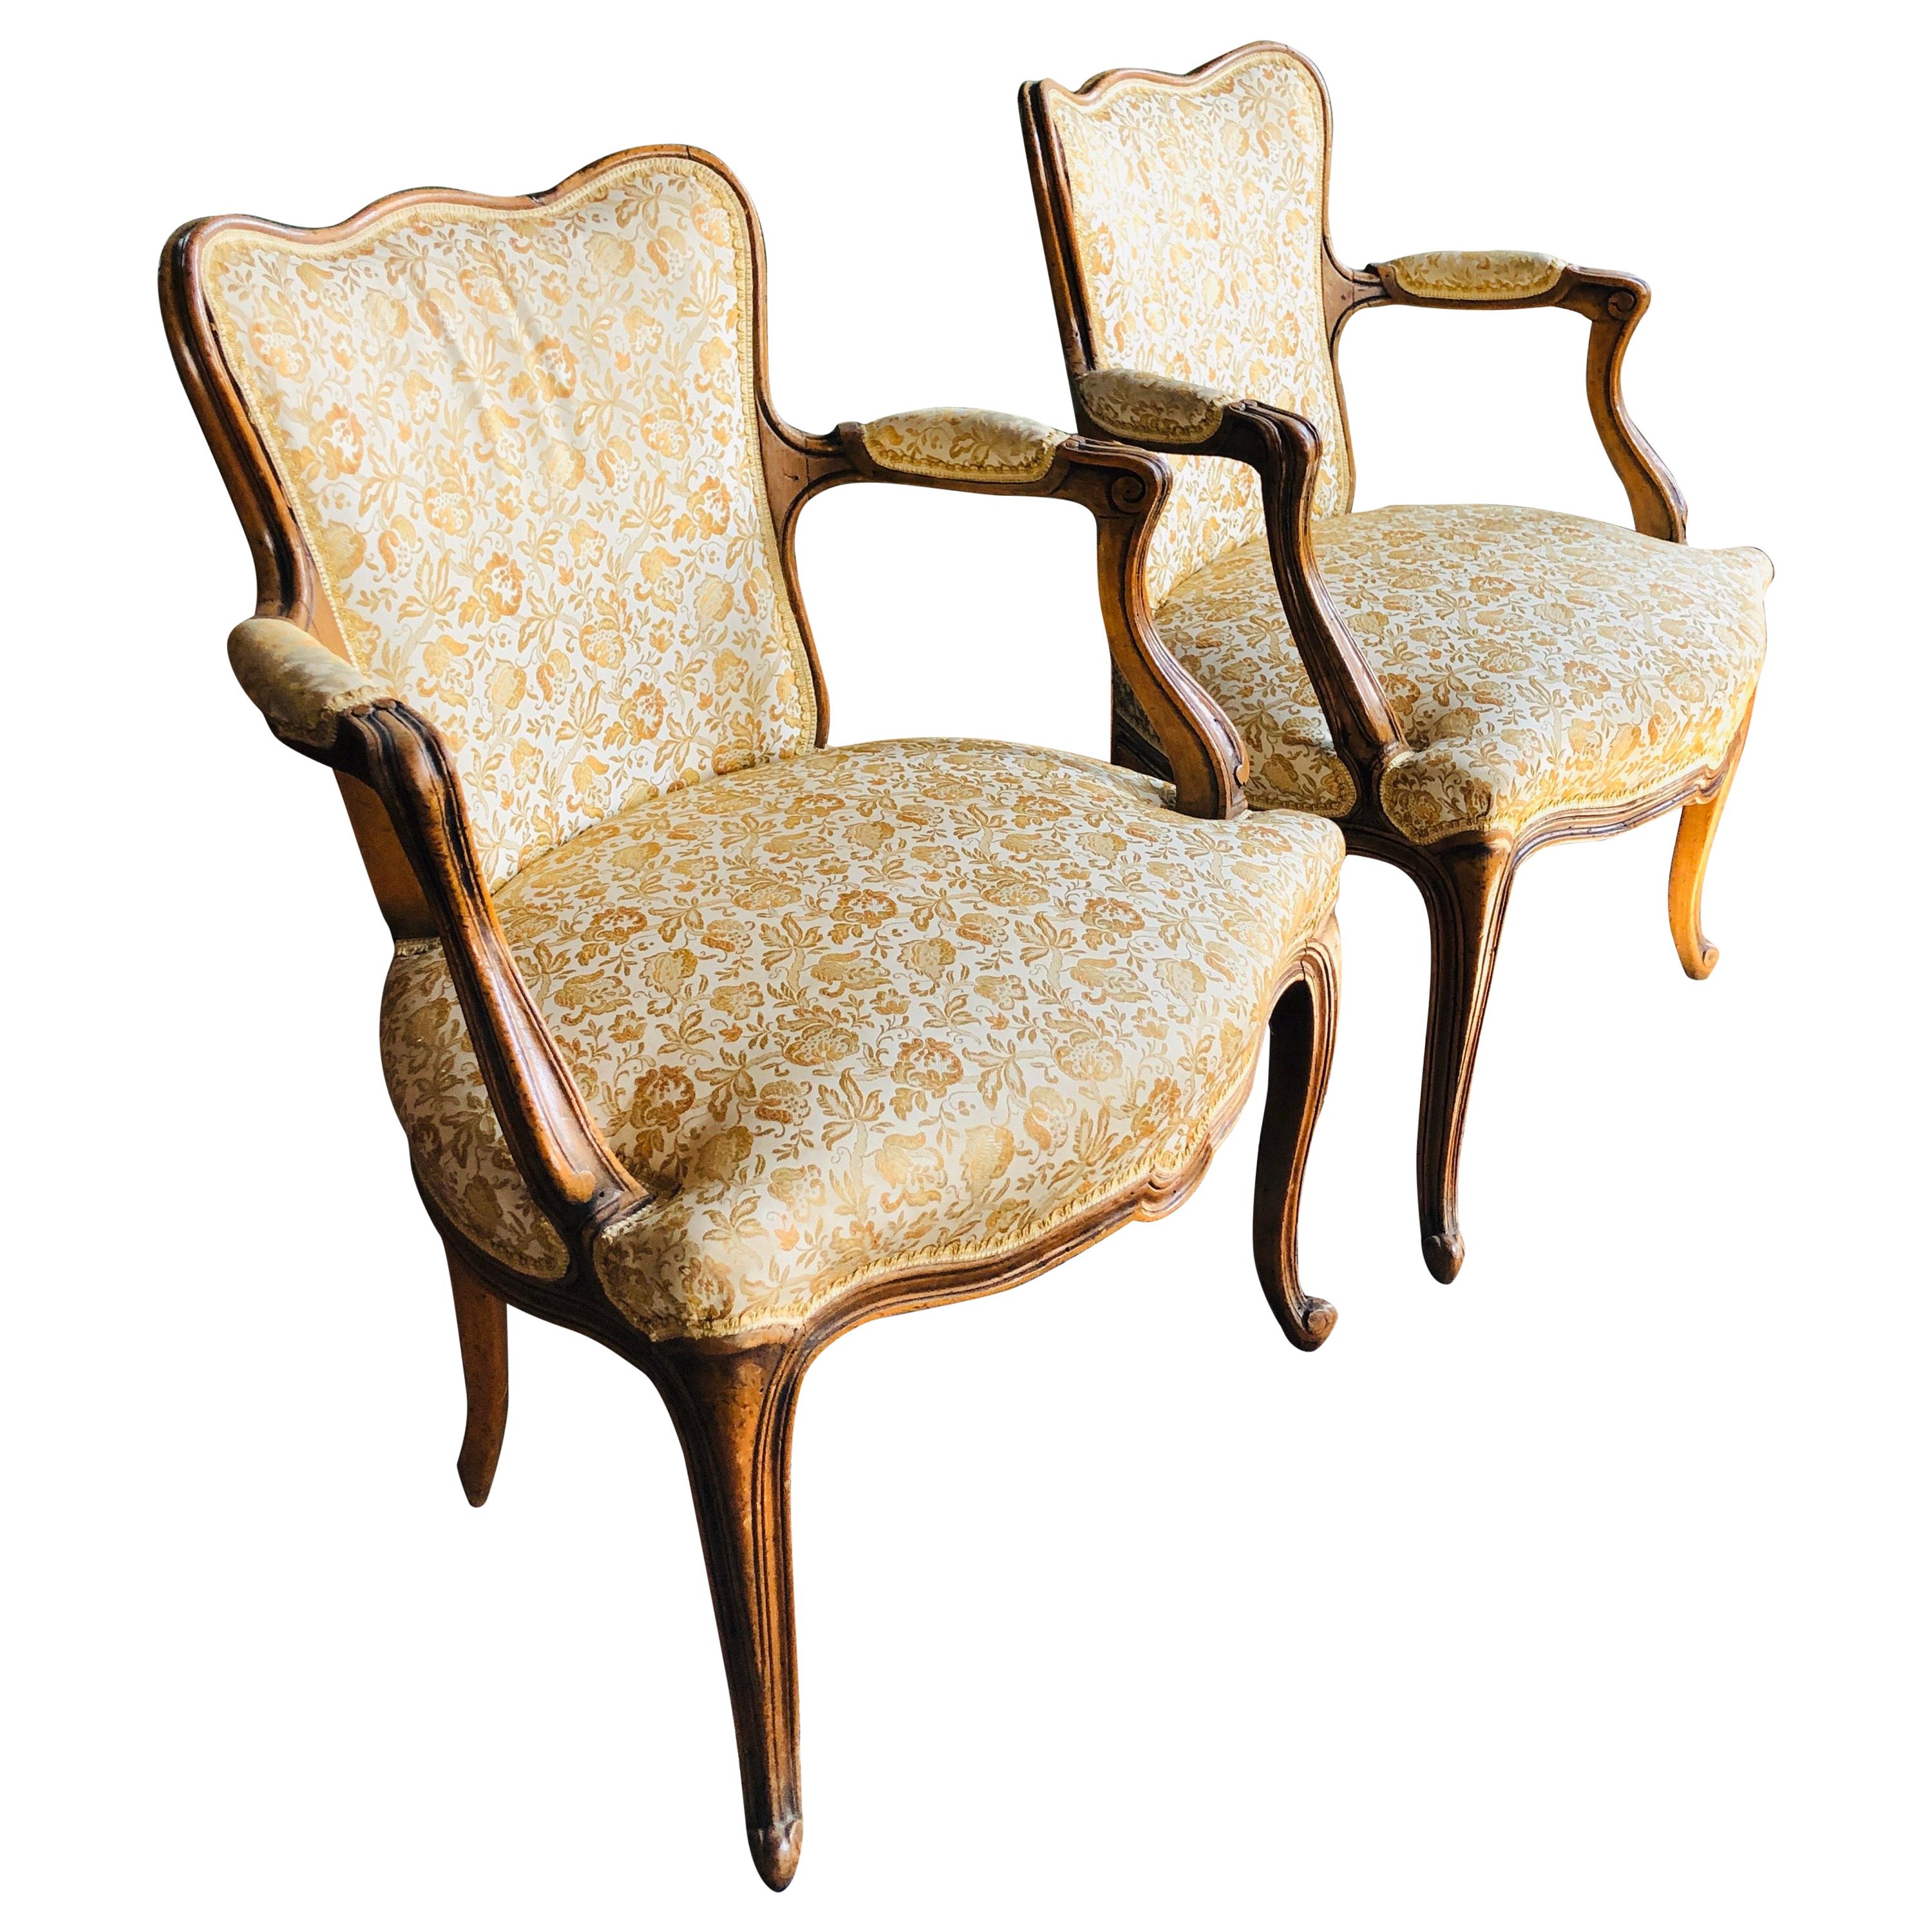 Elegant Pair of Antique French Armchairs in Louis XV Style, circa 1880